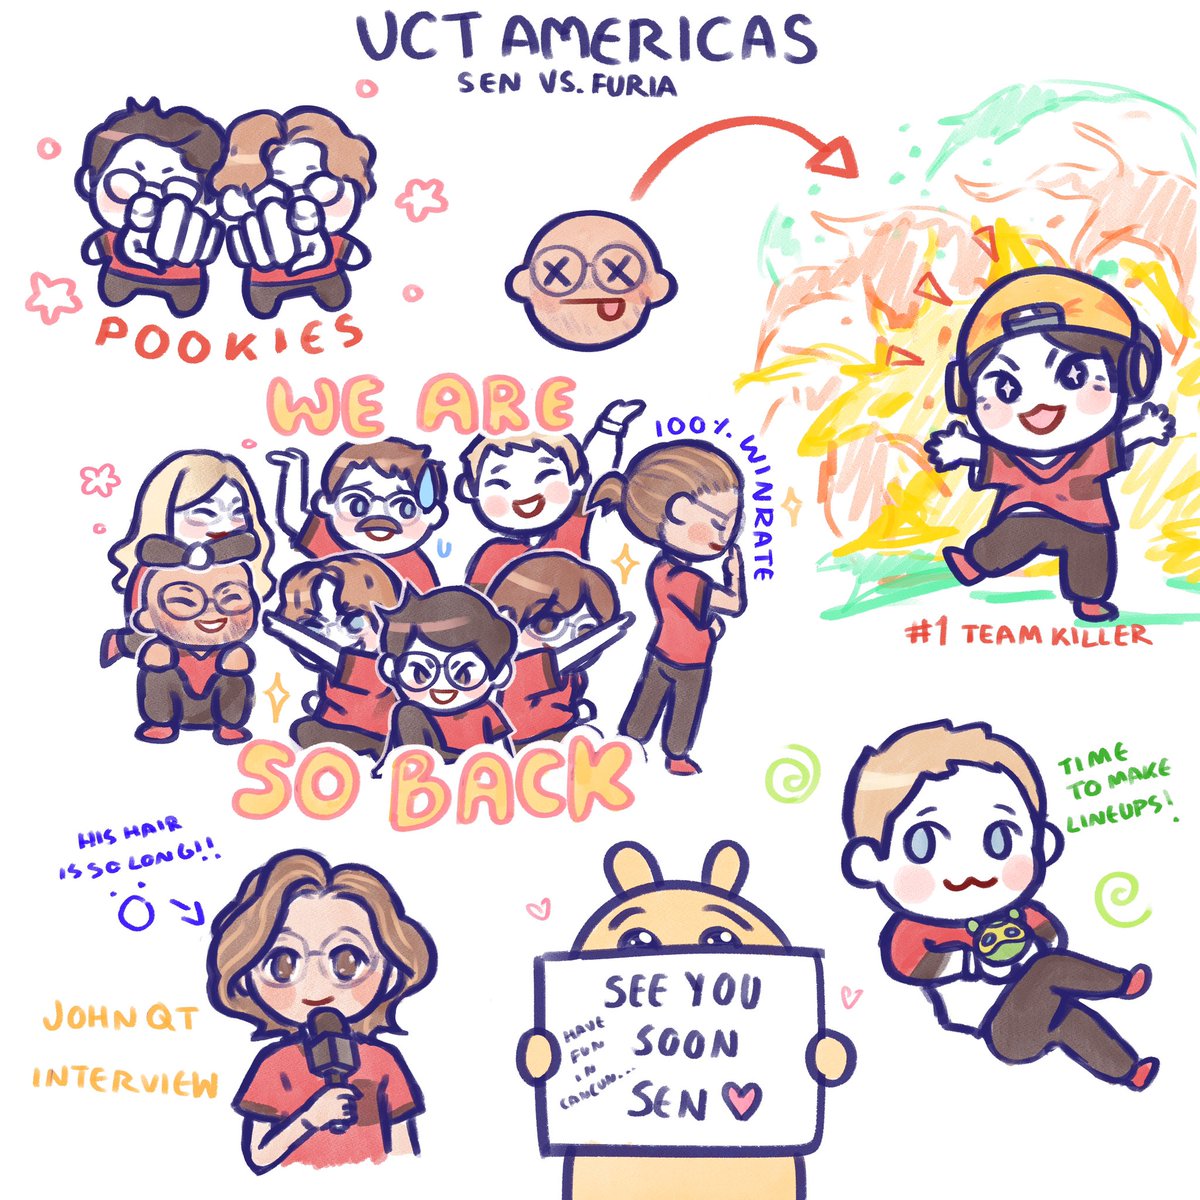 YAY I FINISHED IT! have a good vacation sen, we're already proud of all of u!! 💖 #SENWIN #VCTAmericas